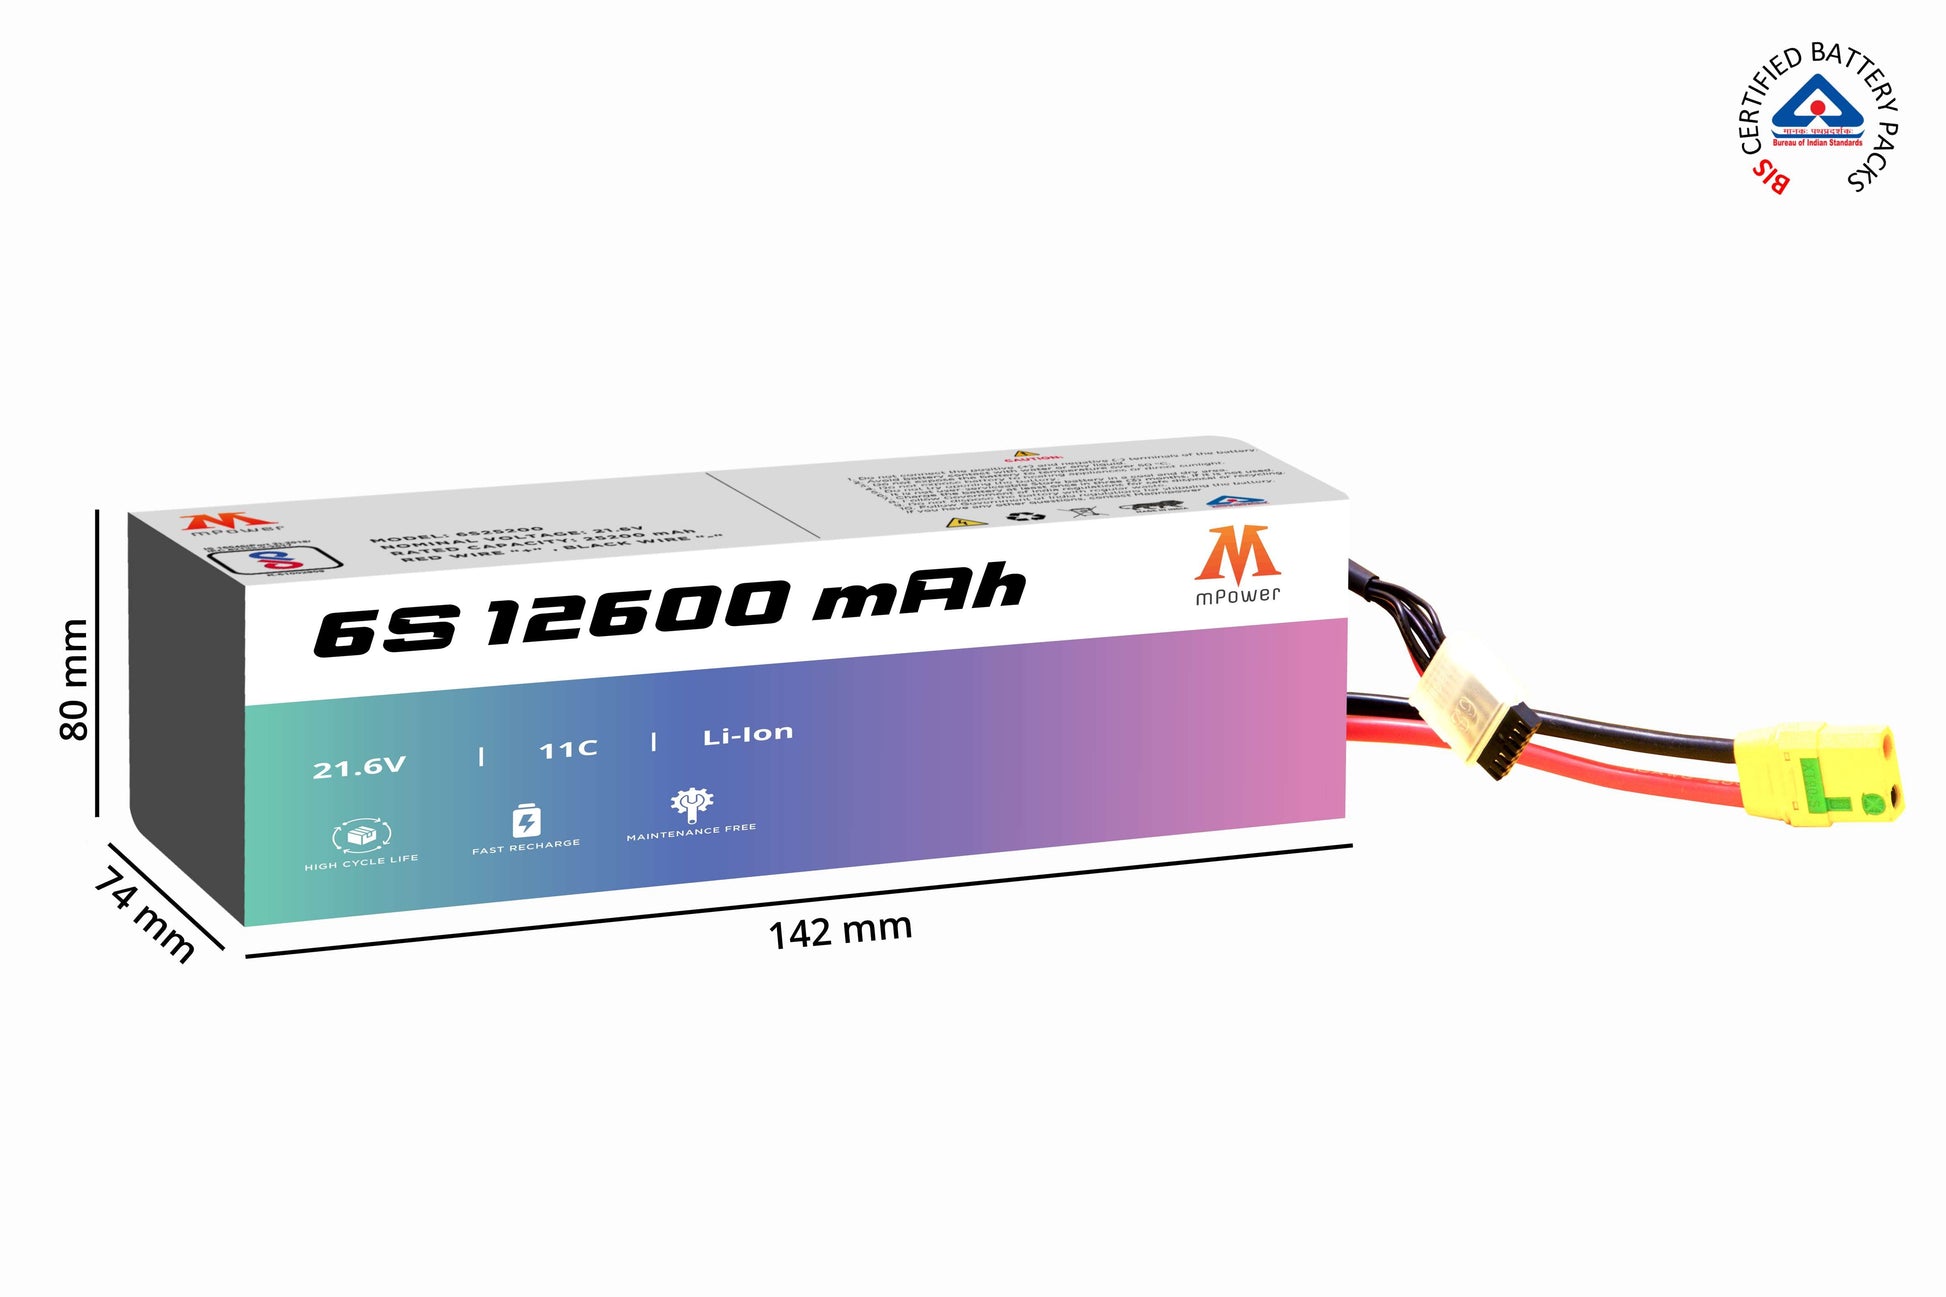 mPower 6S 12600mAh Lithium-ion Battery for Agricultural Spraying Drones-mpowerlithium